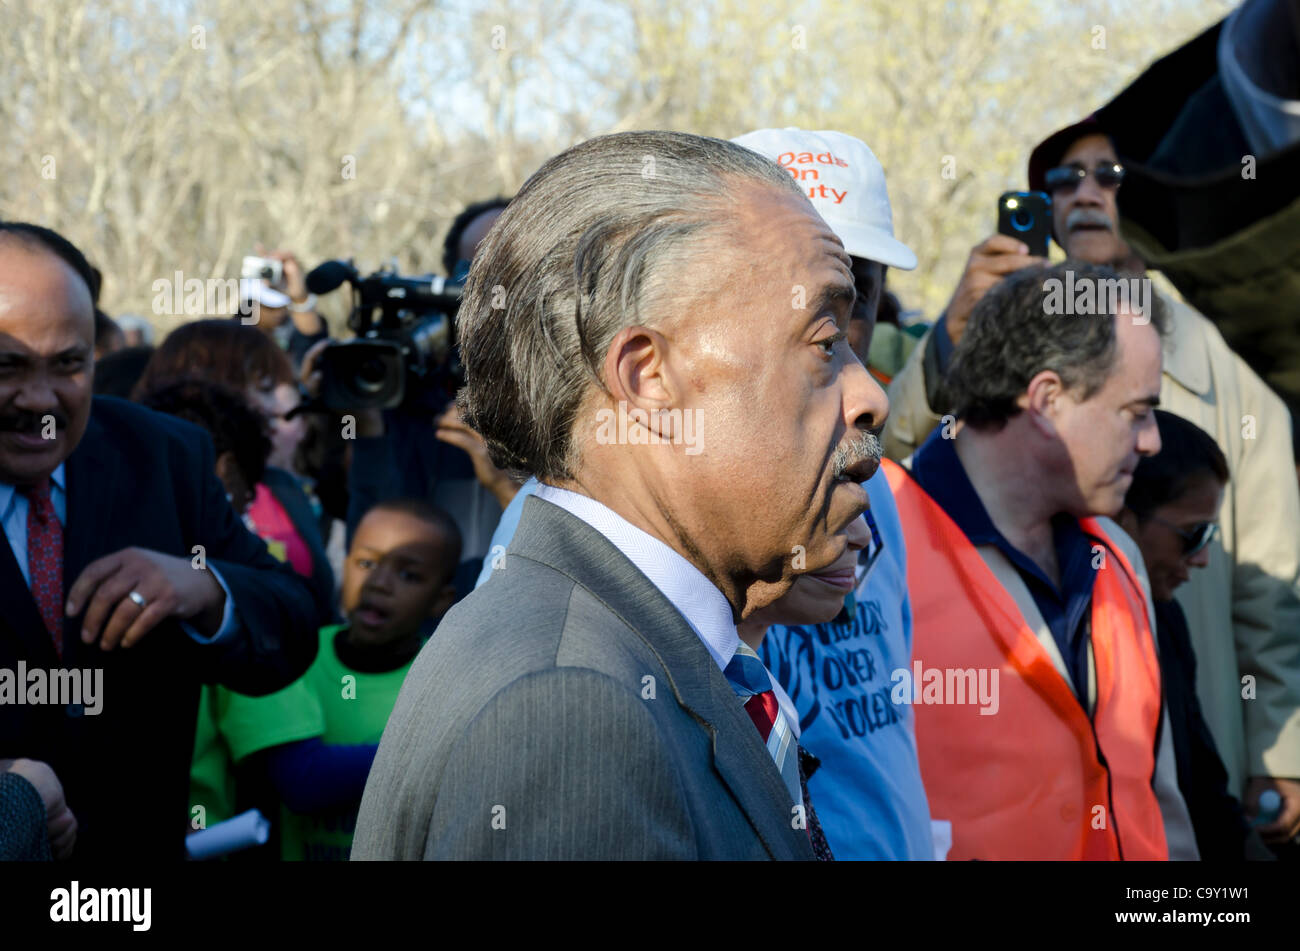 Reverend Al Sharpton and others begin march from Selma to Montgomery on Sunday, March 4, 2012.  This march was a reenactment to commemorate the 1965 voting rights march in Alabama, United States. Stock Photo